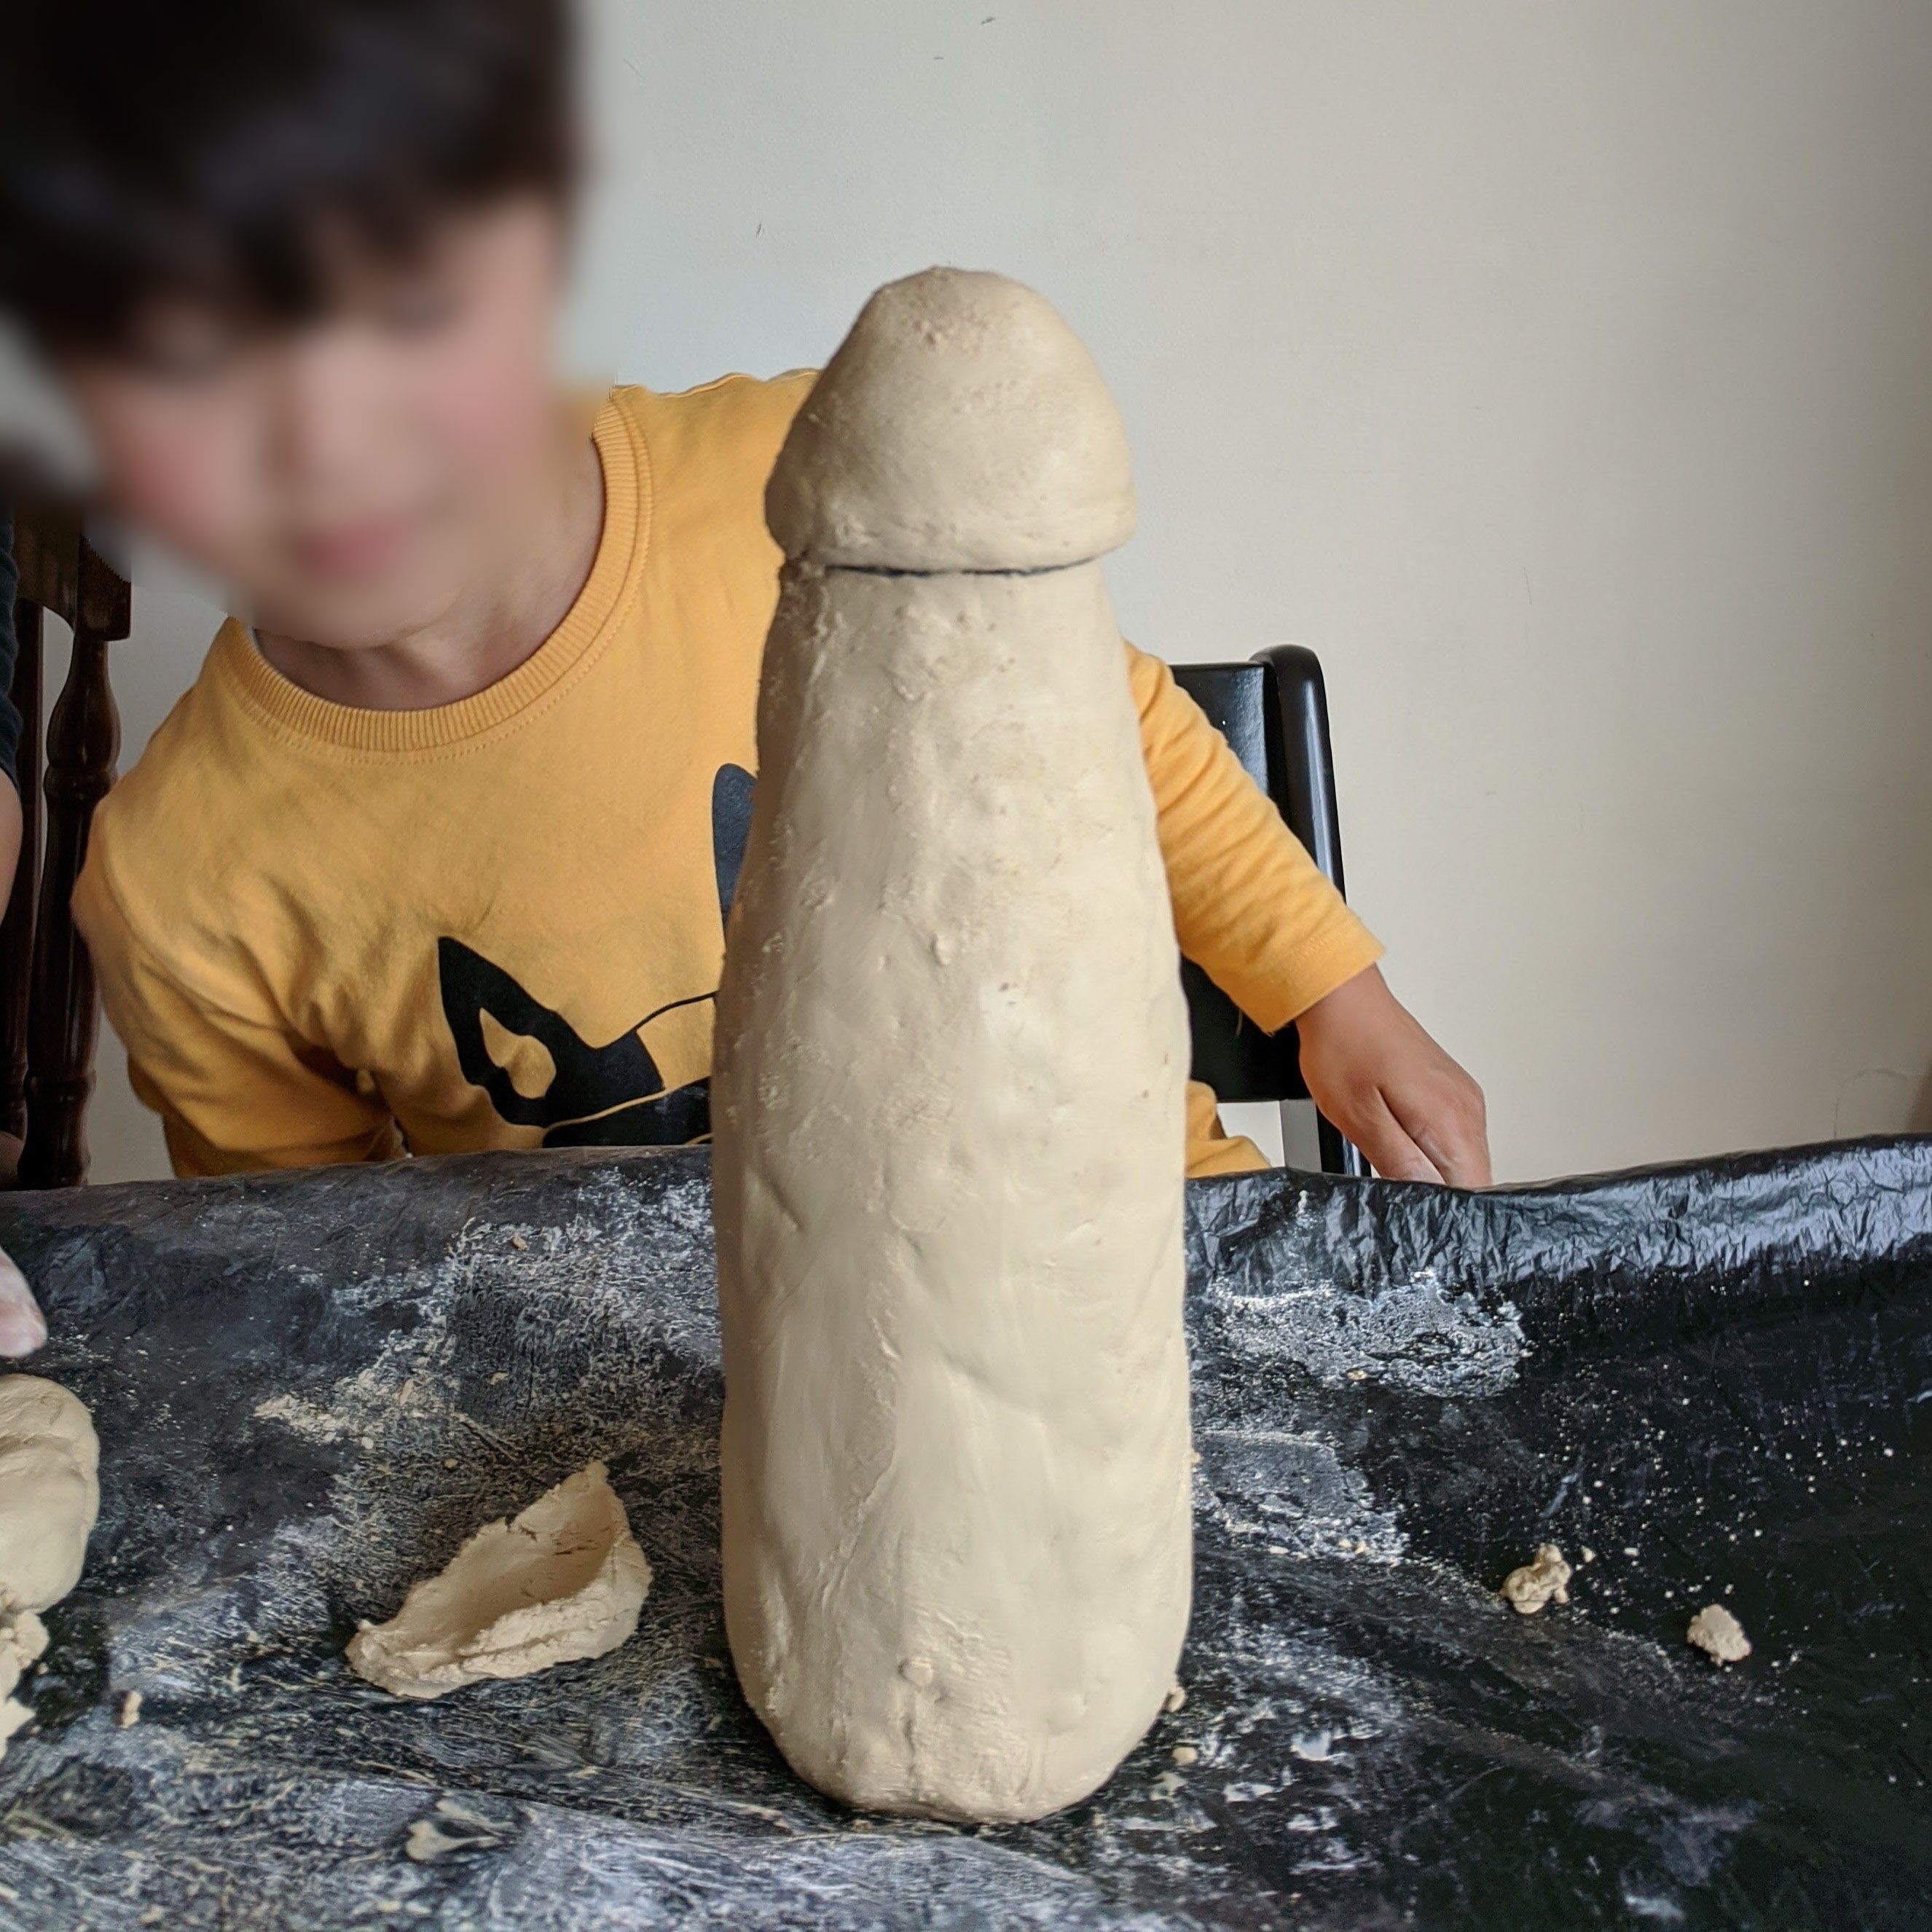 My son made a "rocket ship" out of clay